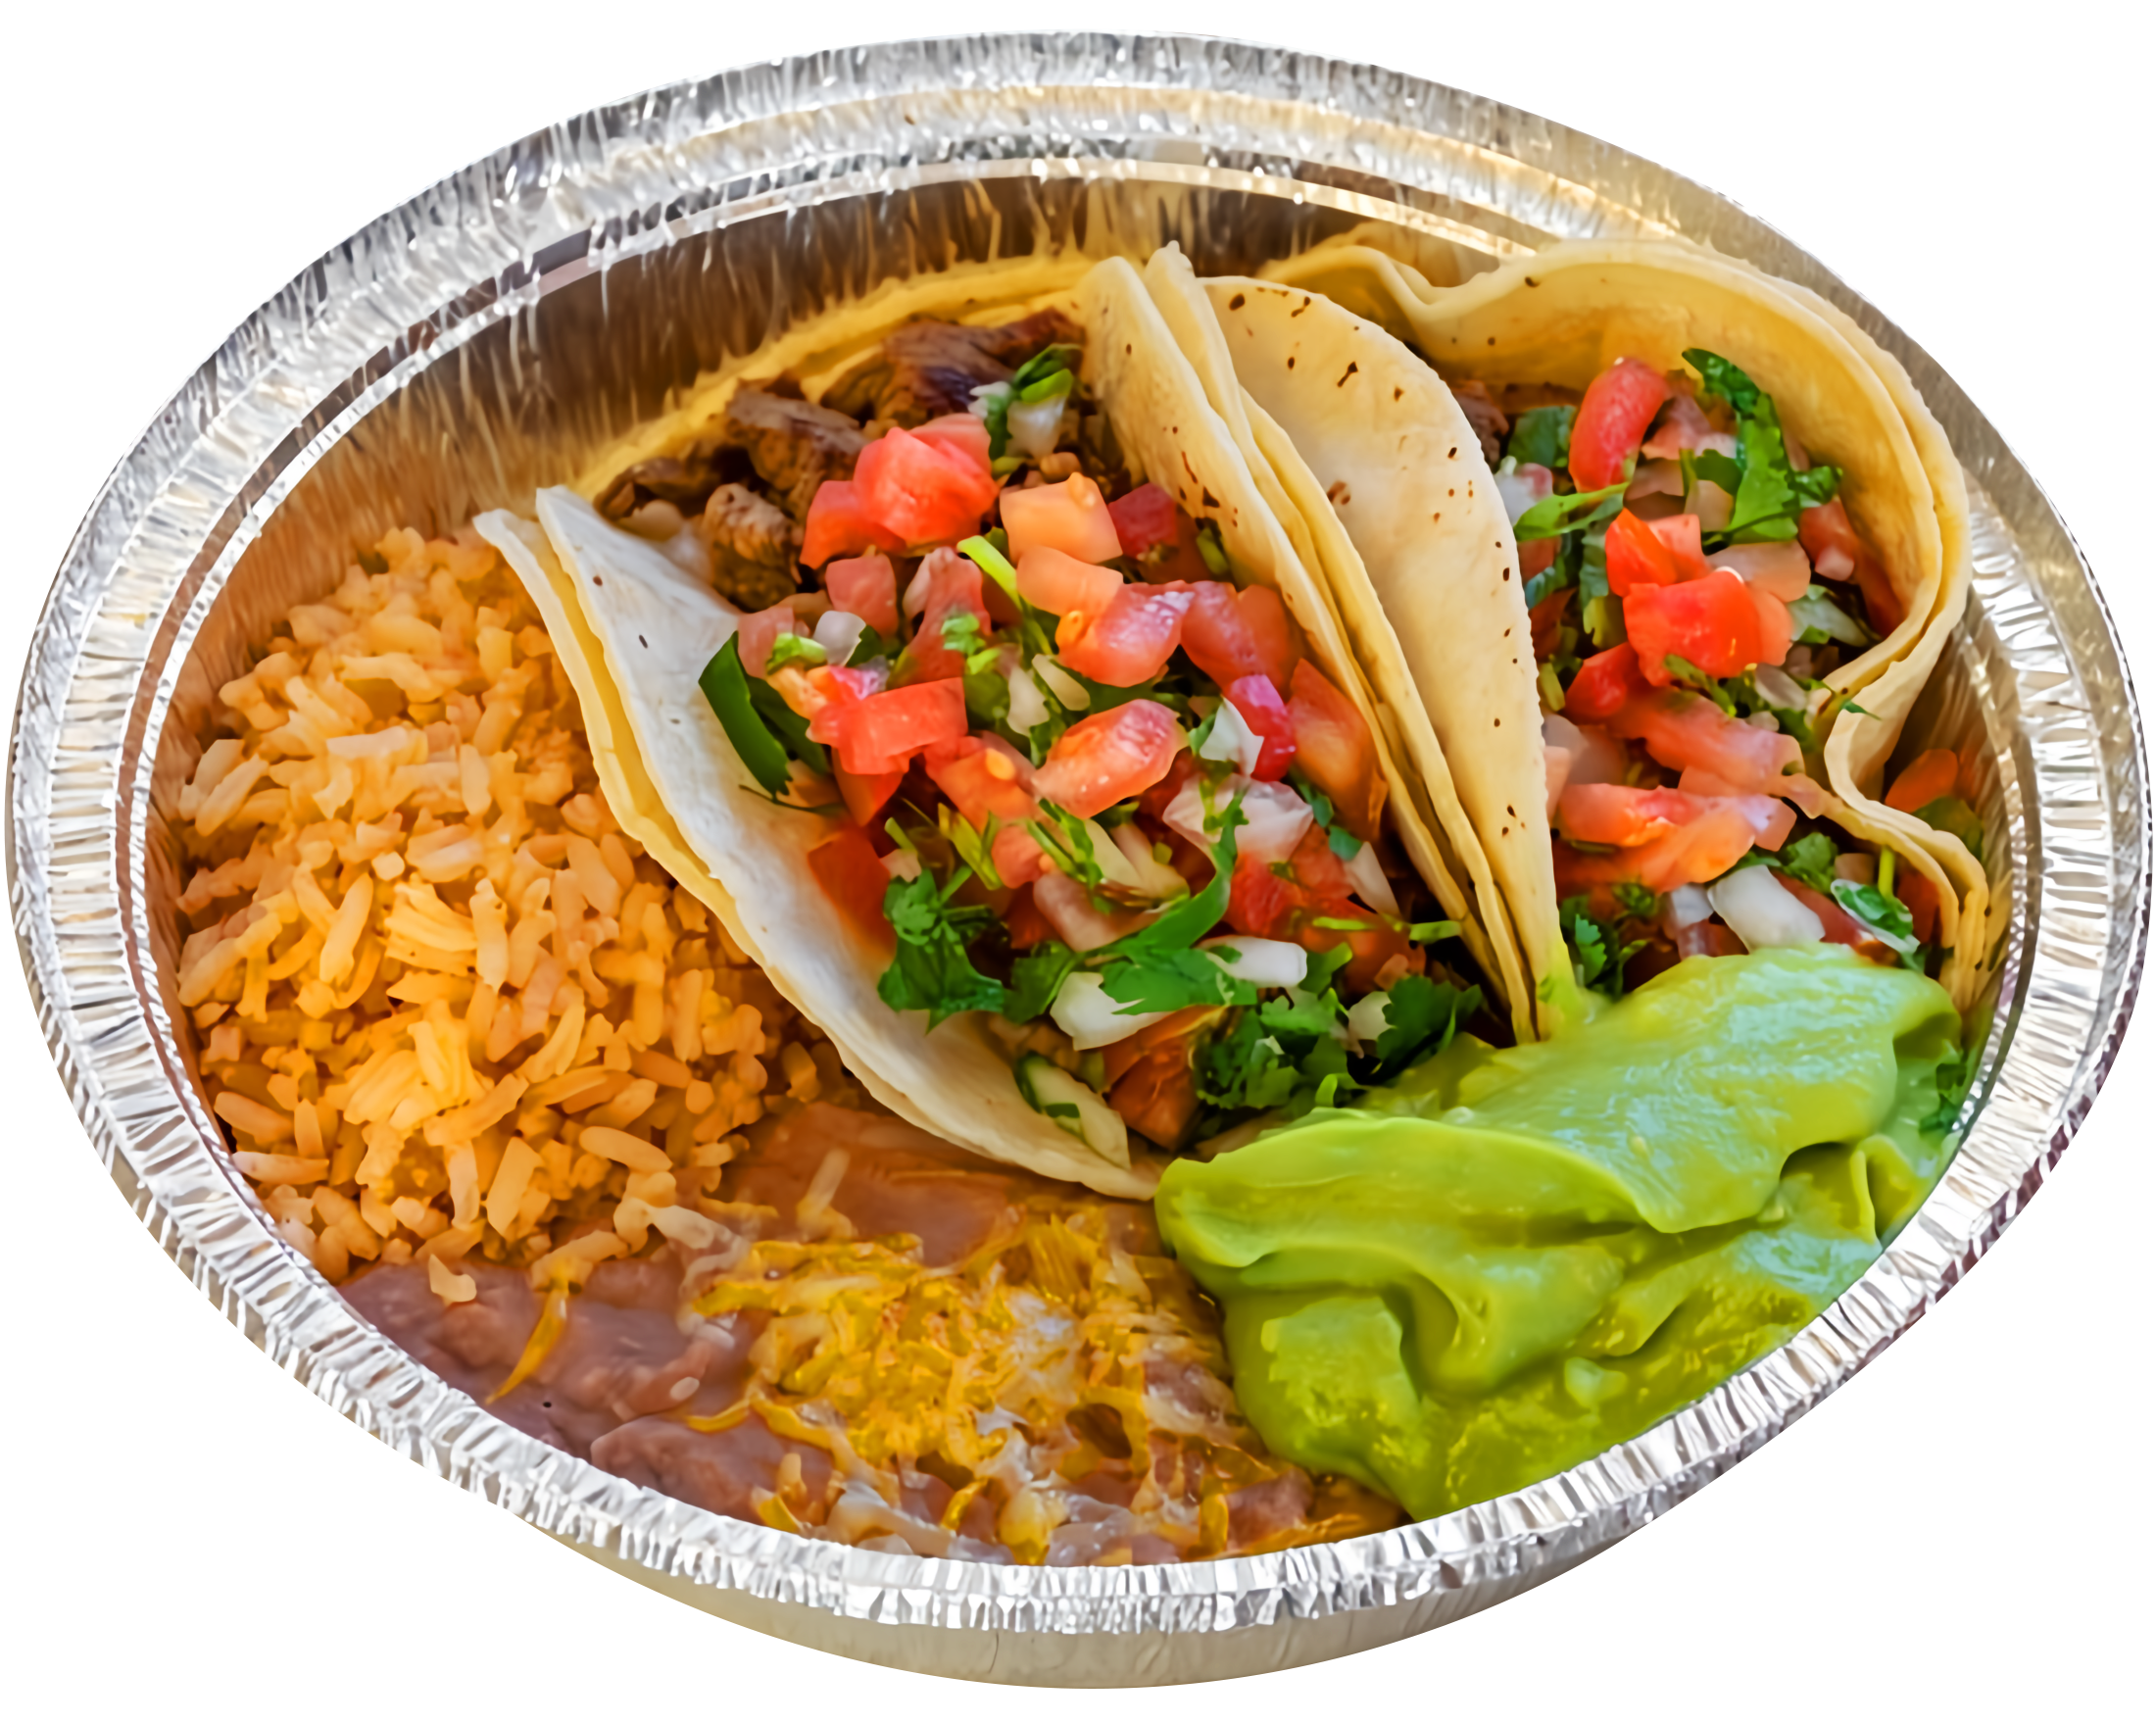 TWO CARNE ASADA TACOS PLATE Resize